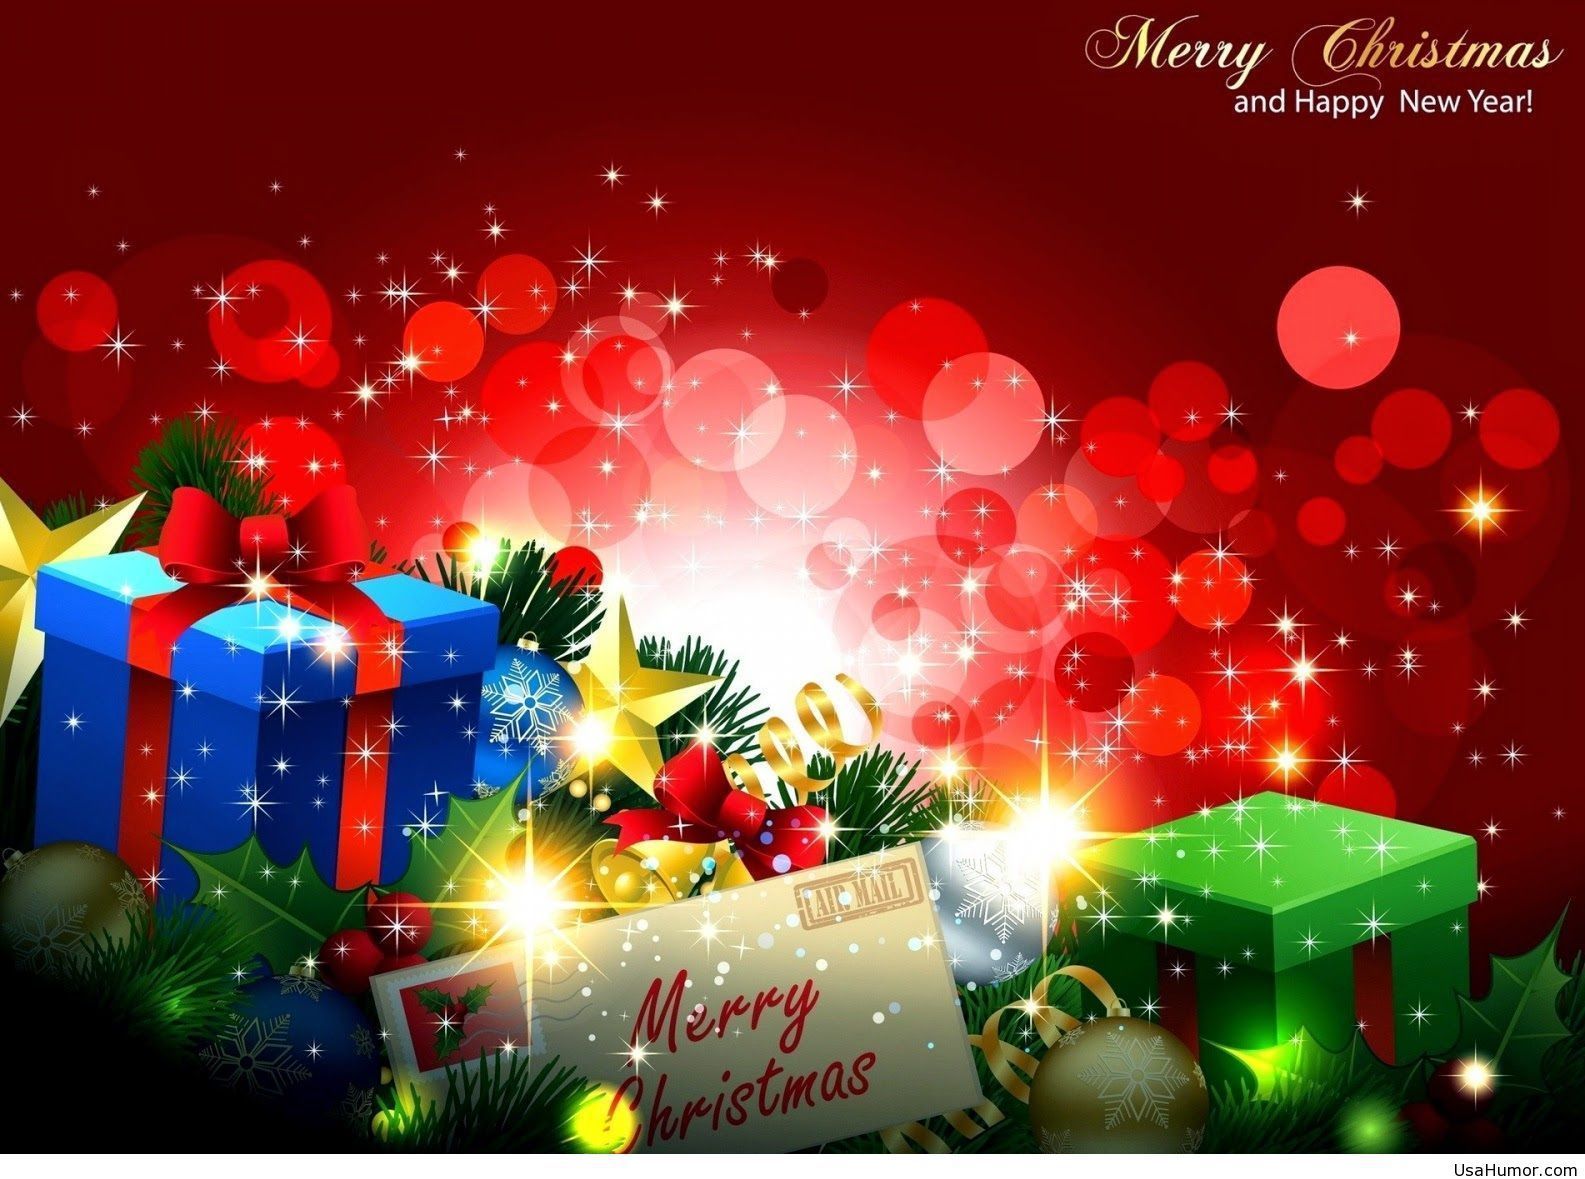 Merry Christmas and Happy New Year Wallpaper Free Merry Christmas and Happy New Year Background